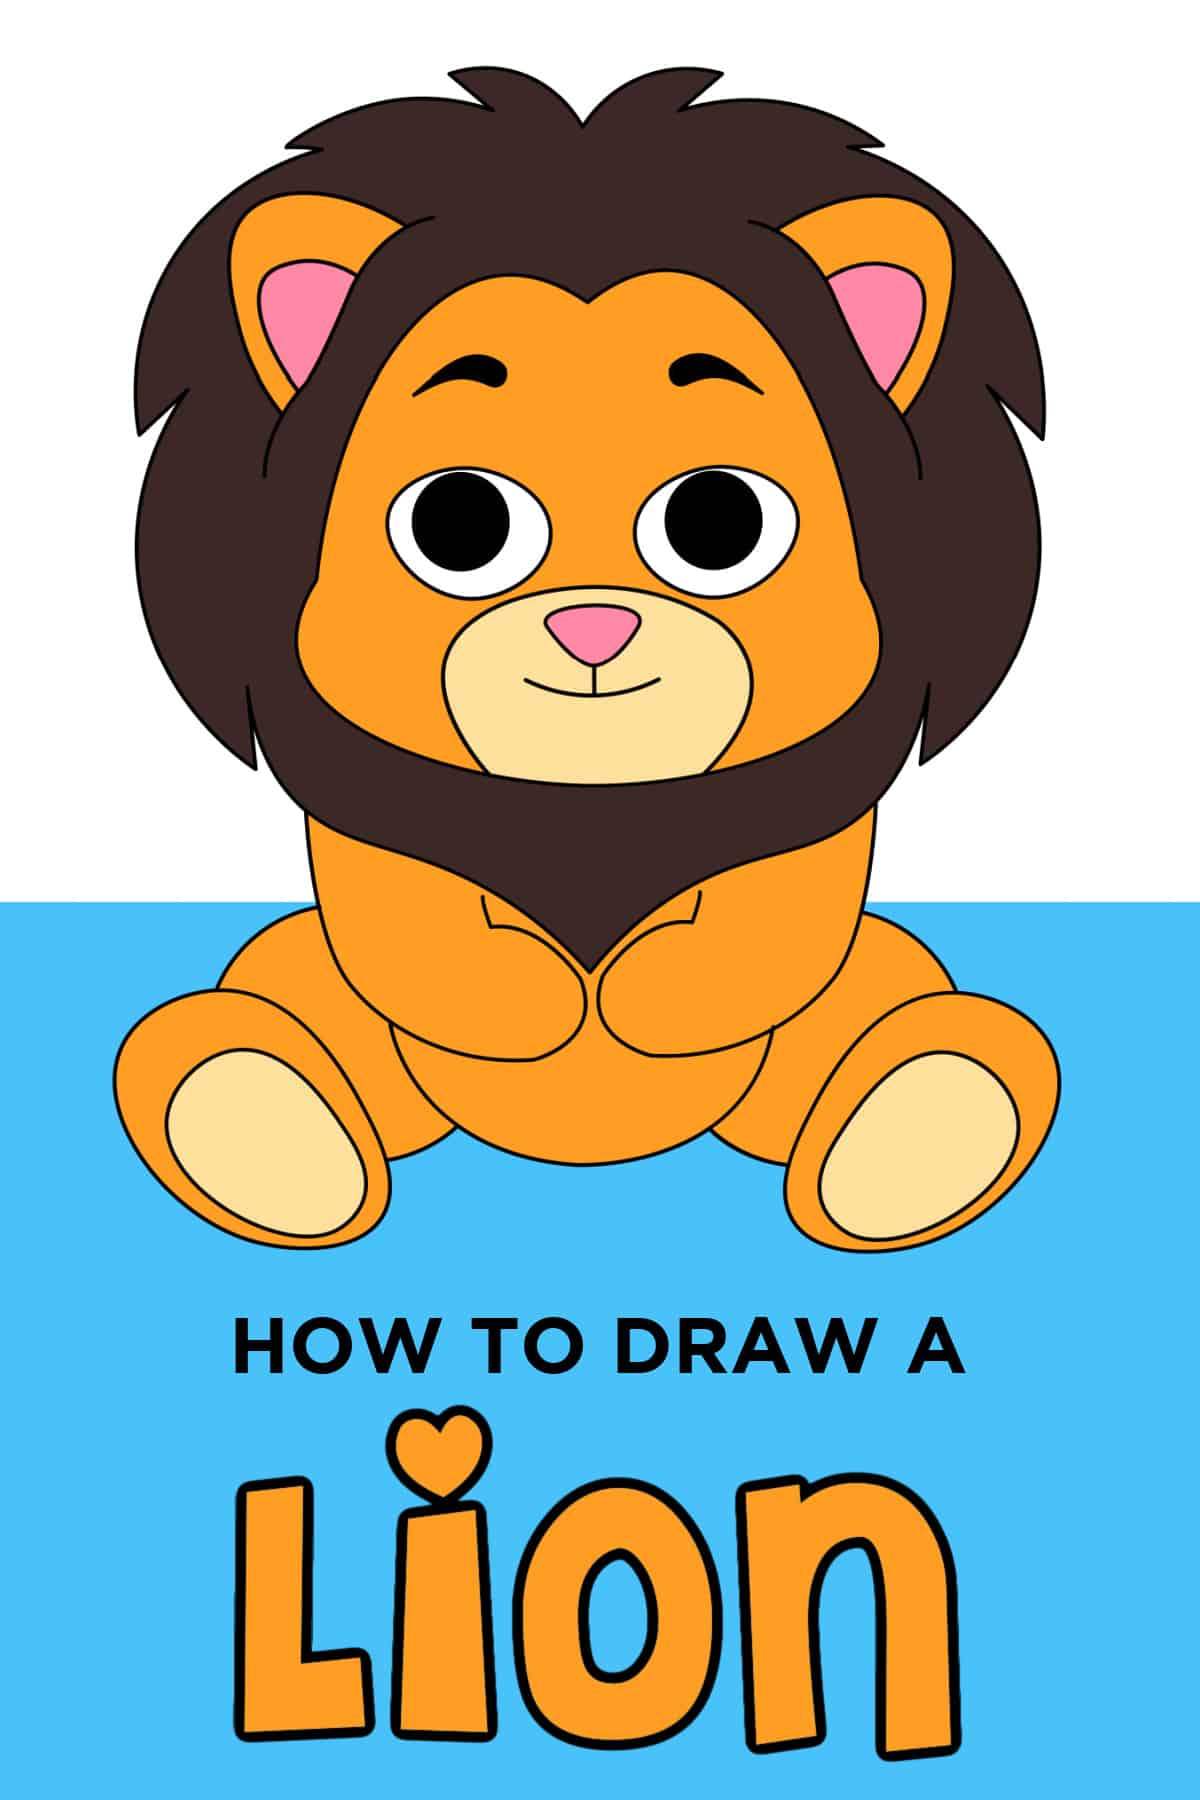 How To Draw A Funny Cartoon Pencil - Easy step-by-step art lesson